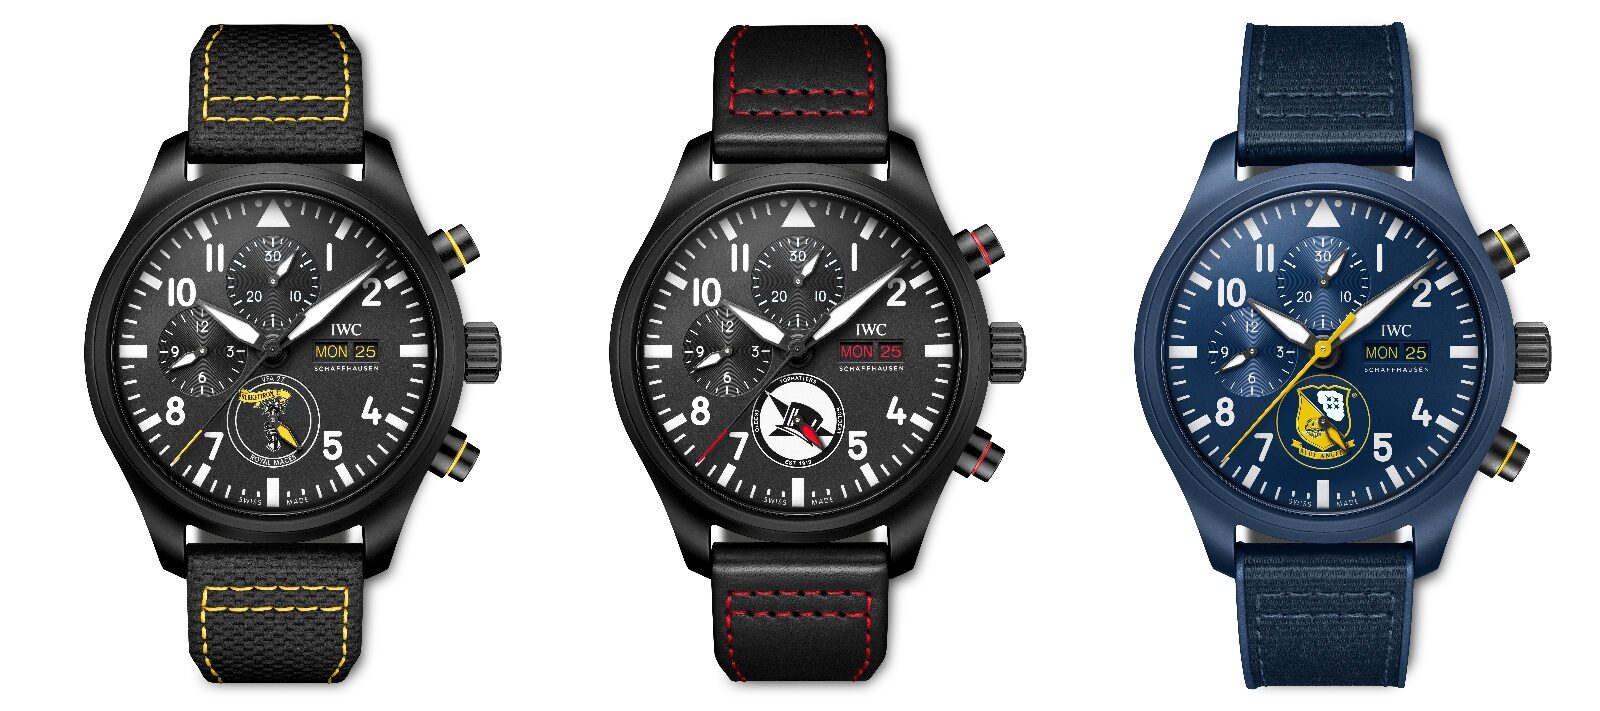 The Pilot’s Watches Chronograph Editions “Royal Maces”, “Tophatters”, and “Blue Angels” all feature the respective squadron patch on the dial and eye-catching details in the corresponding unit’s colour scheme